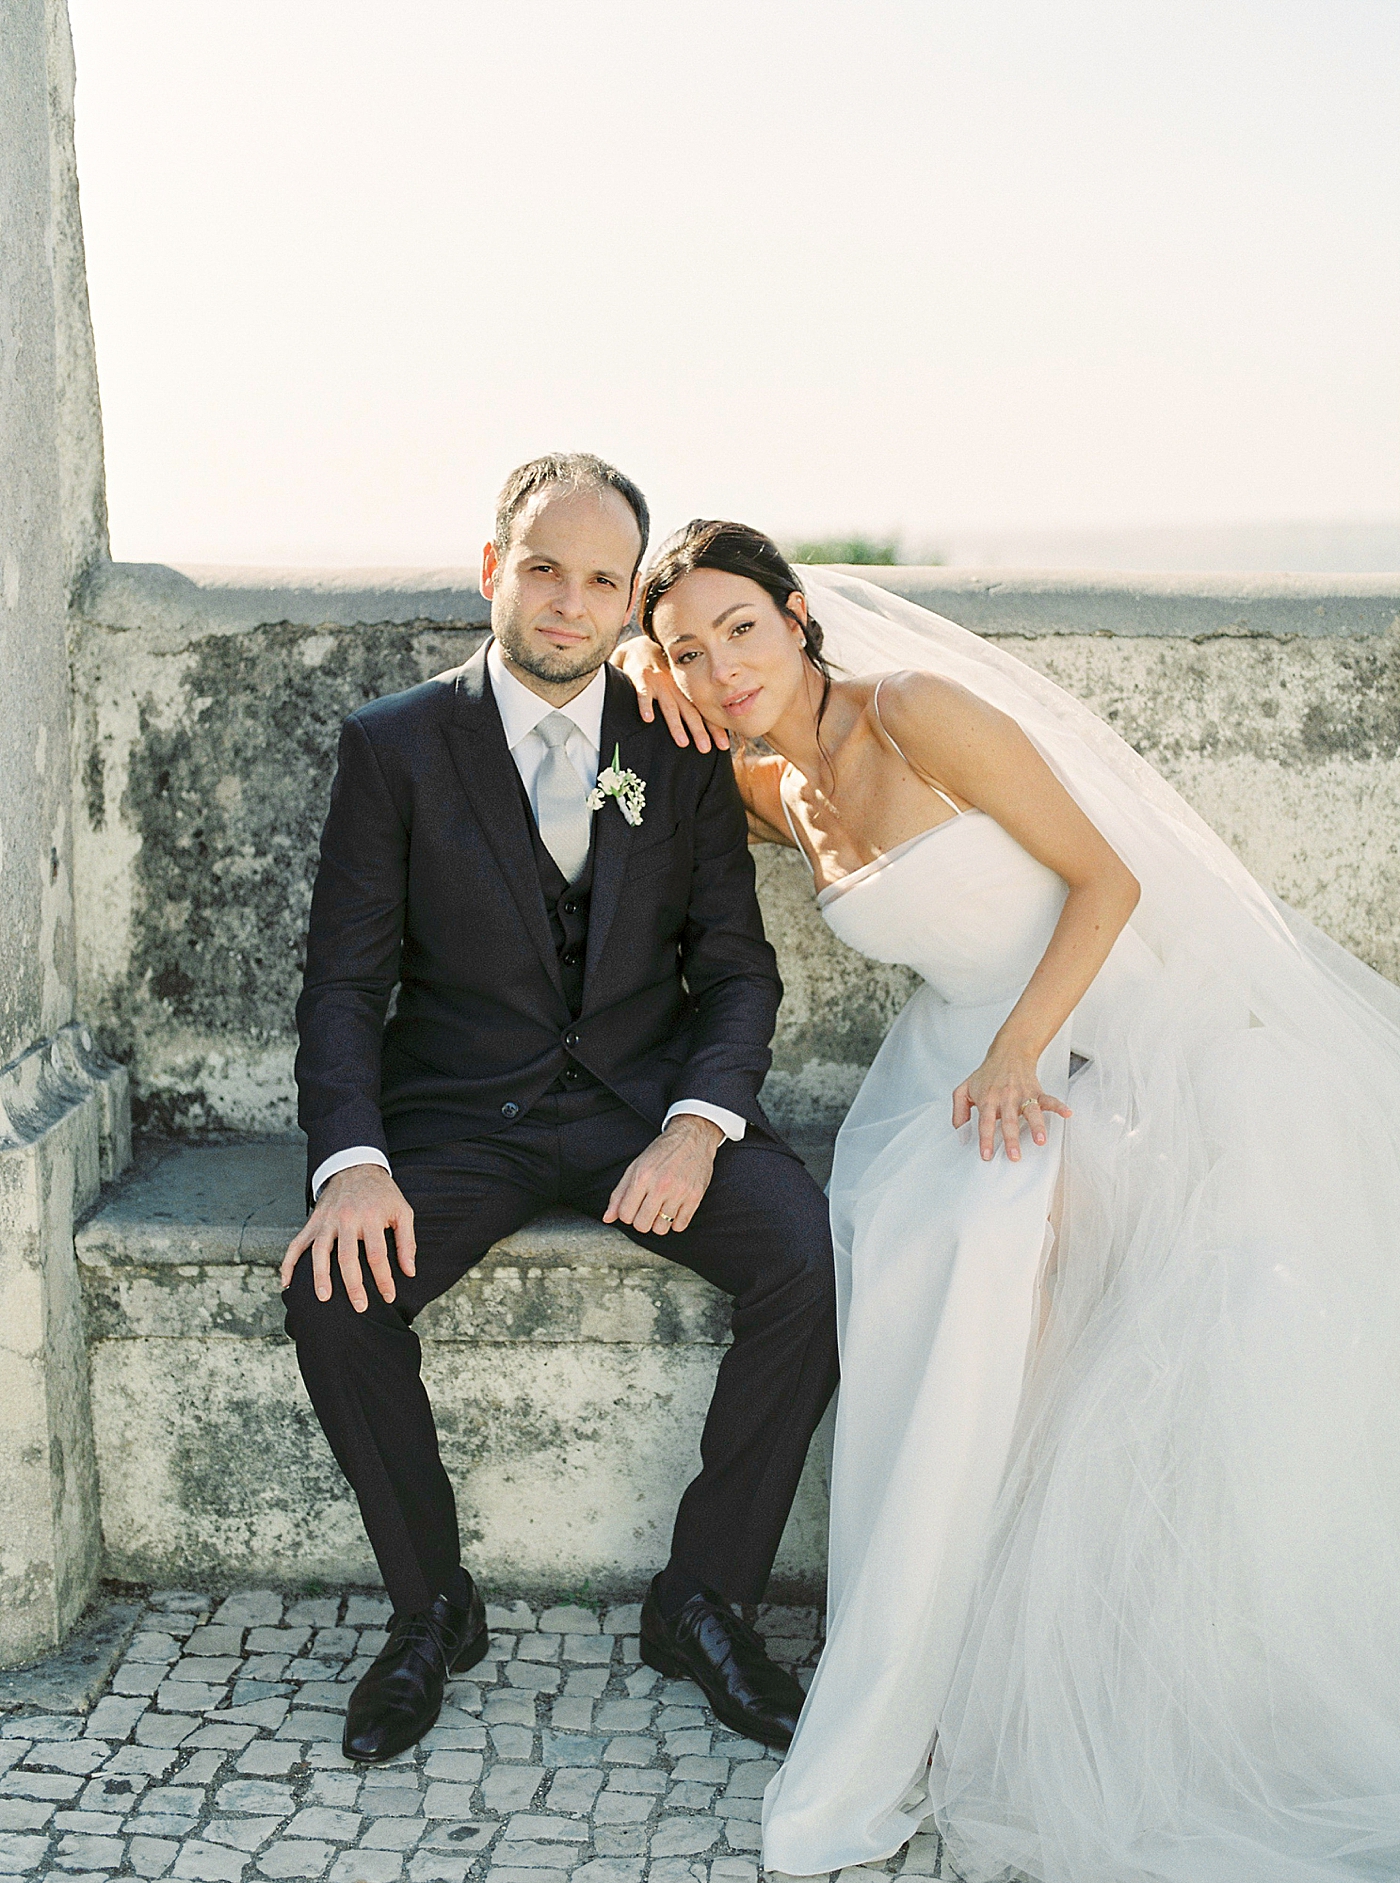 Bride leaning on groom shoulder after their Palácio de Seteais Elopement | Image by Diane Sotero Photography